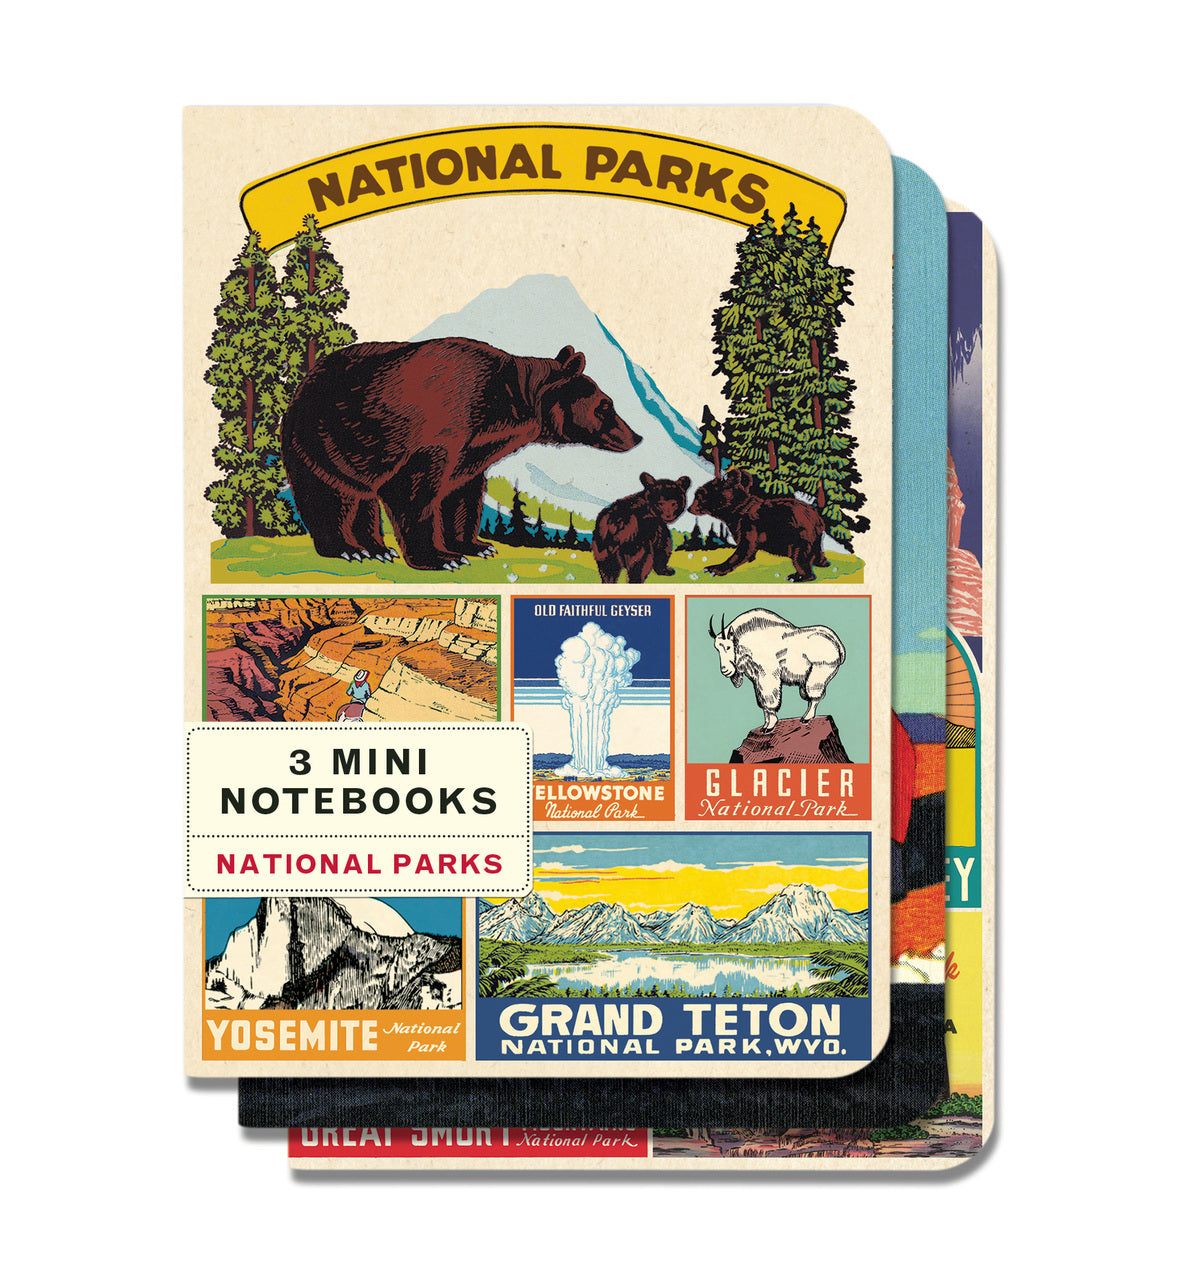 National Parks Mini Notebook Set- new for 2018! This set of three high quality notebooks features reproductions of vintage posters and advertisements from national parks around the country.